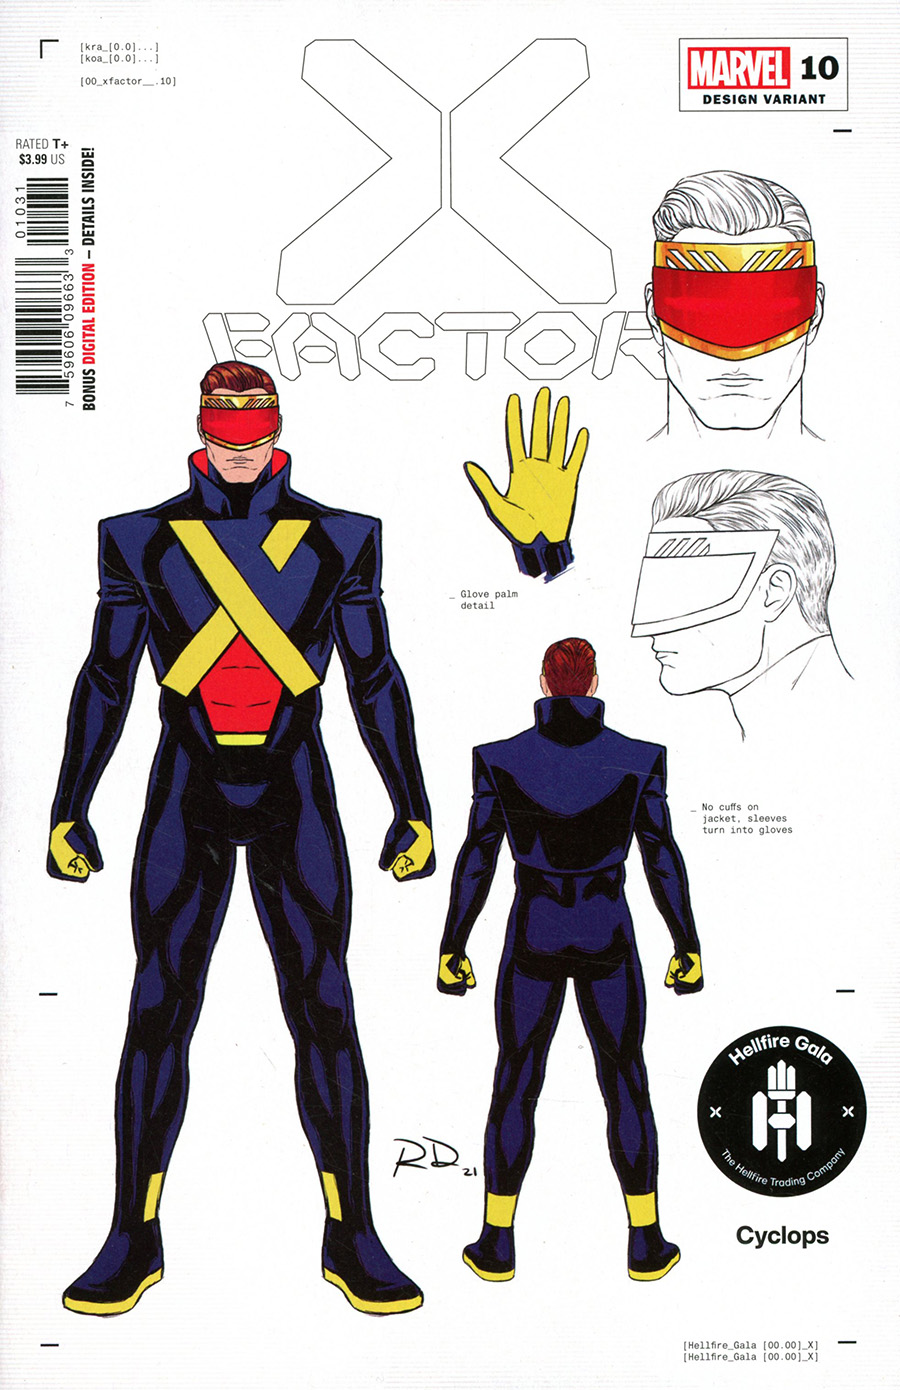 X-Factor Vol 4 #10 Cover E Incentive Russell Dauterman Cyclops Character Design Variant Cover (Hellfire Gala Tie-In)